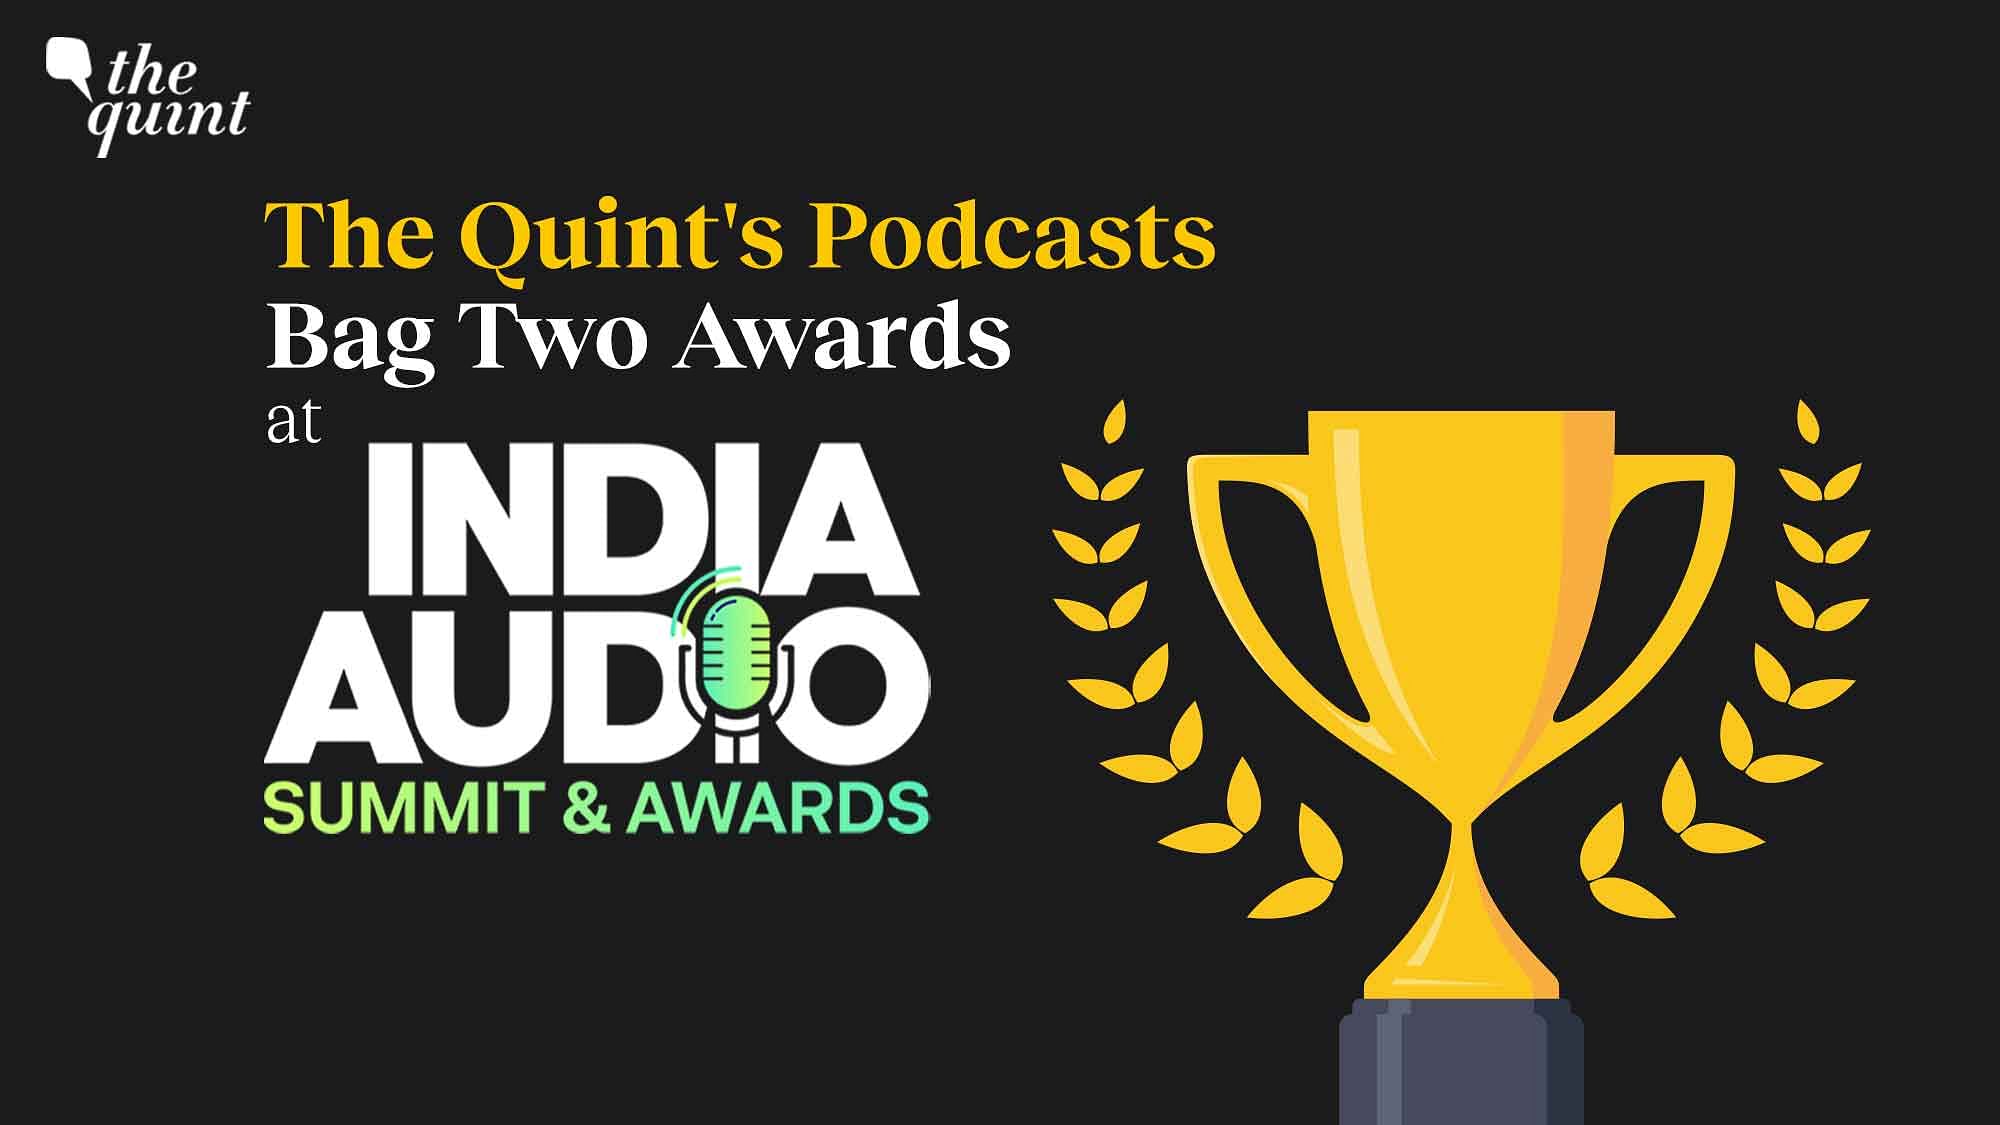 <div class="paragraphs"><p>We are delighted to announce that <strong>The Quint's</strong> Podcast team won two awards at the India Audio Summit and Awards on Tuesday, 24 January.</p></div>